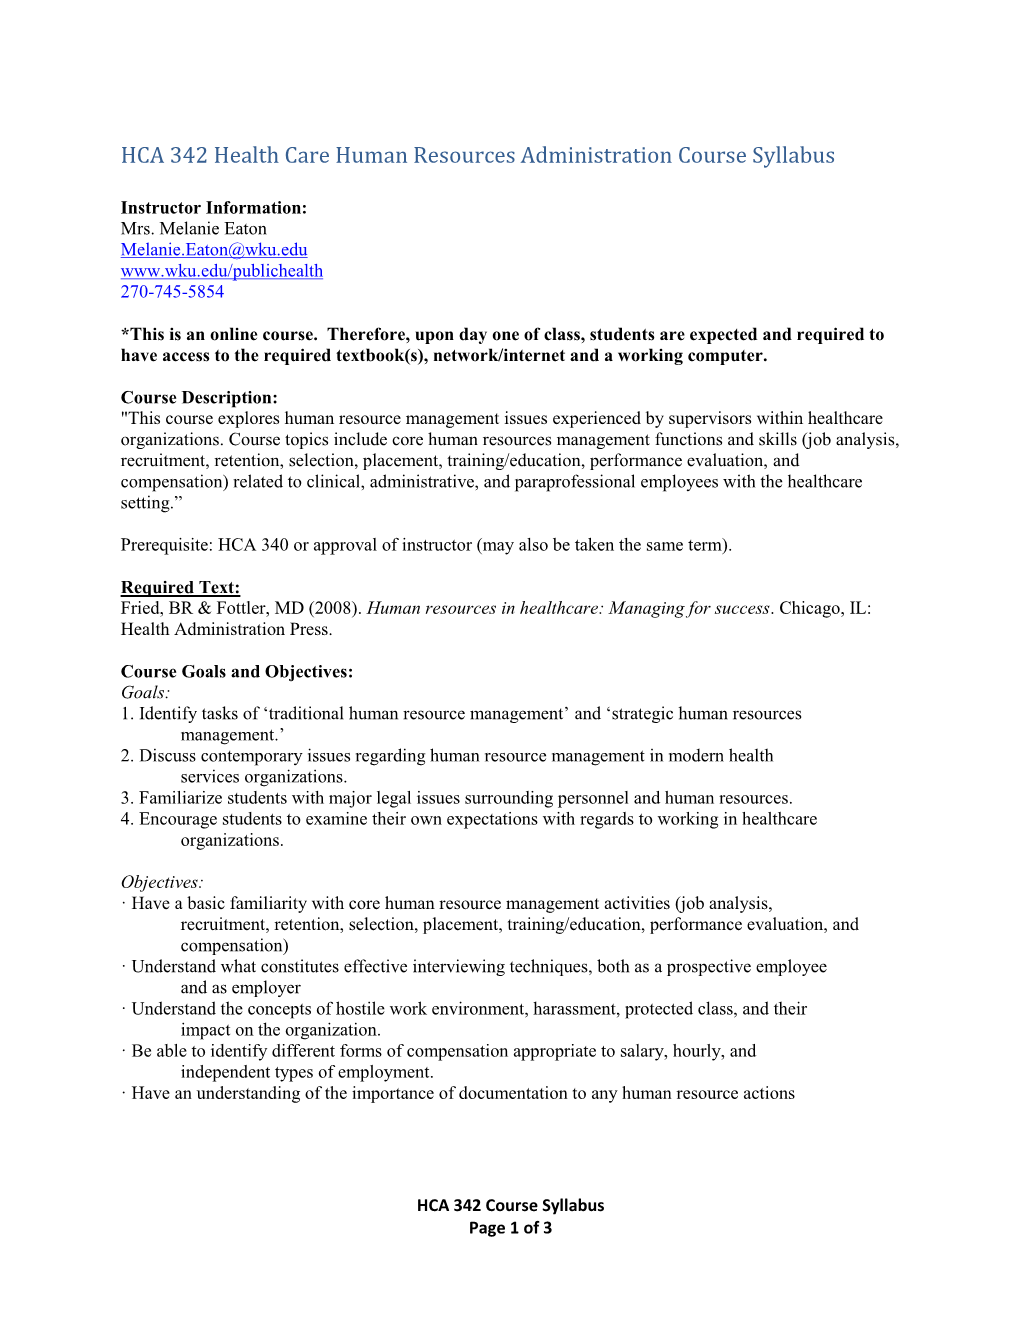 HCA 342 Health Care Human Resources Administration Course Syllabus